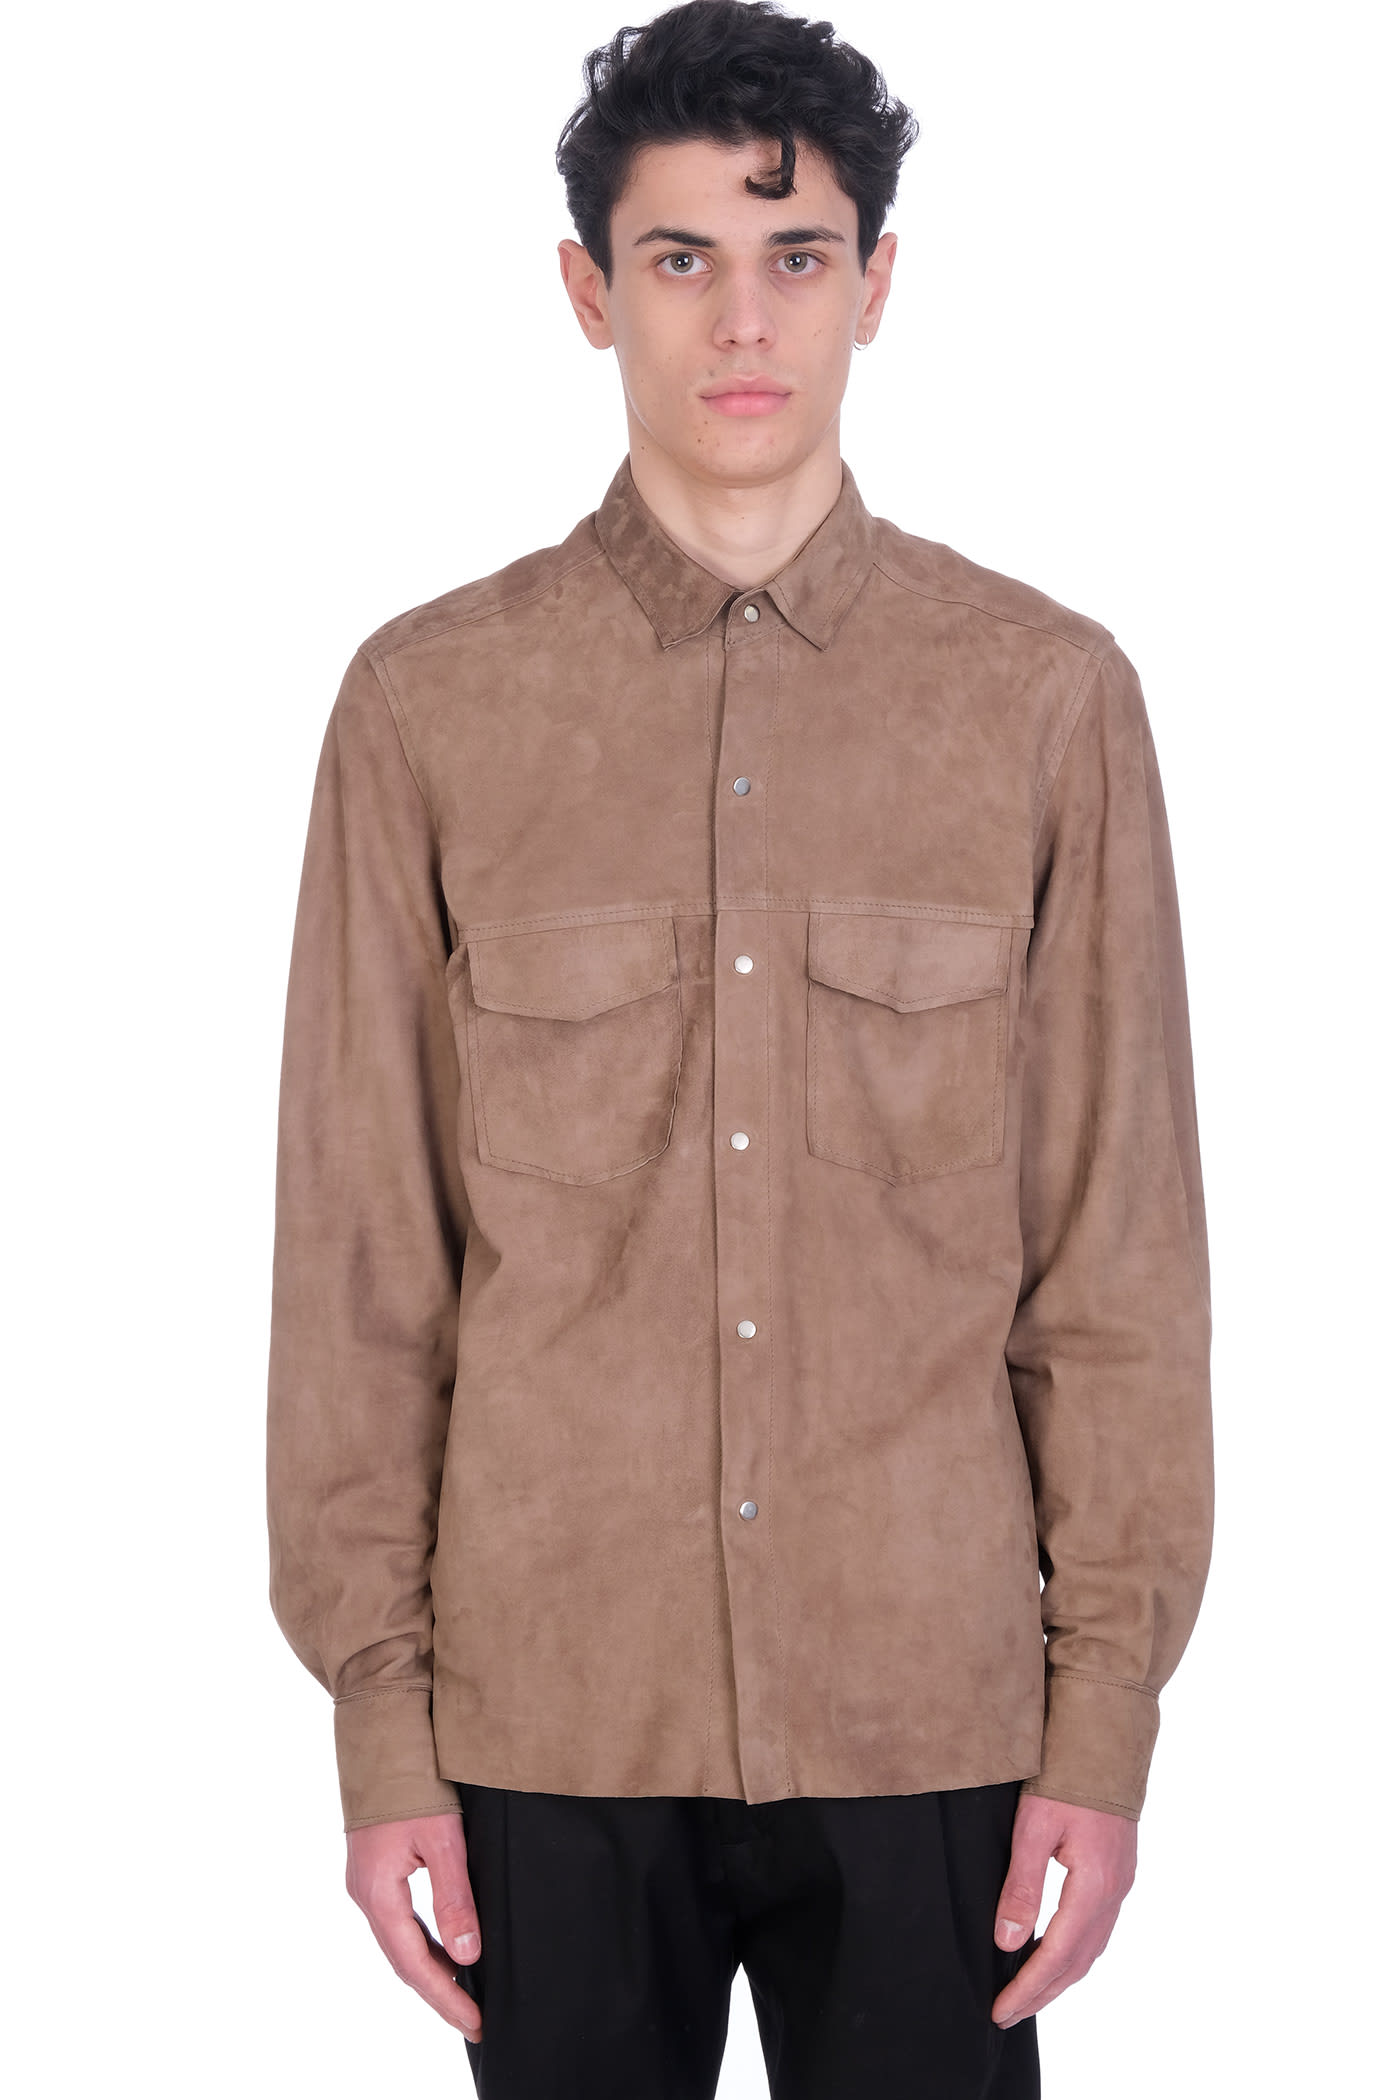 LOW BRAND SHIRT IN BEIGE LEATHER,L1JSS215855A029